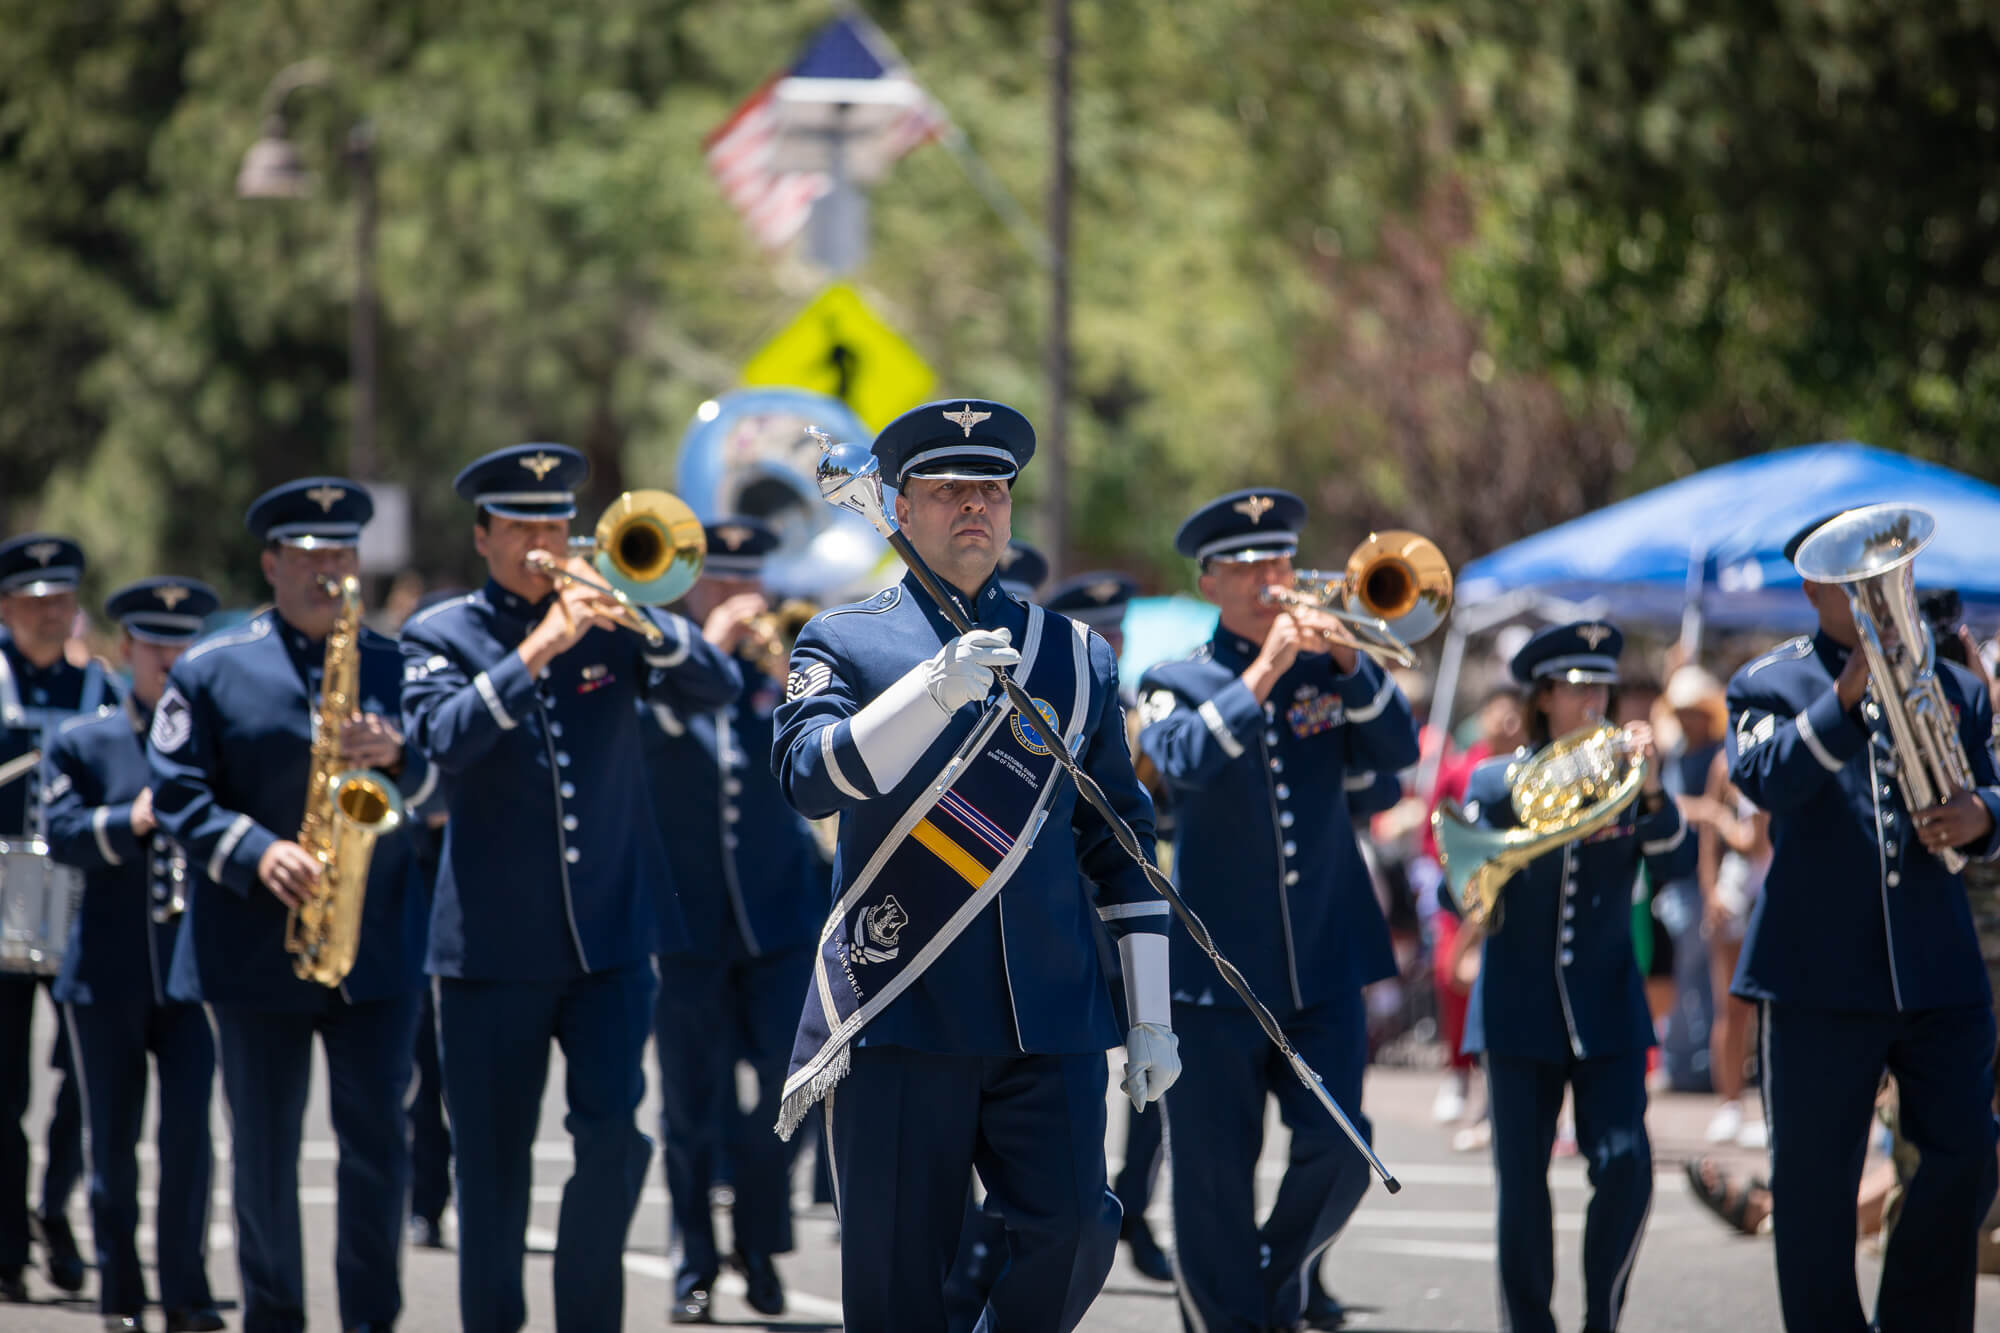 A marching band plays during the Mammoth 4th of July parade